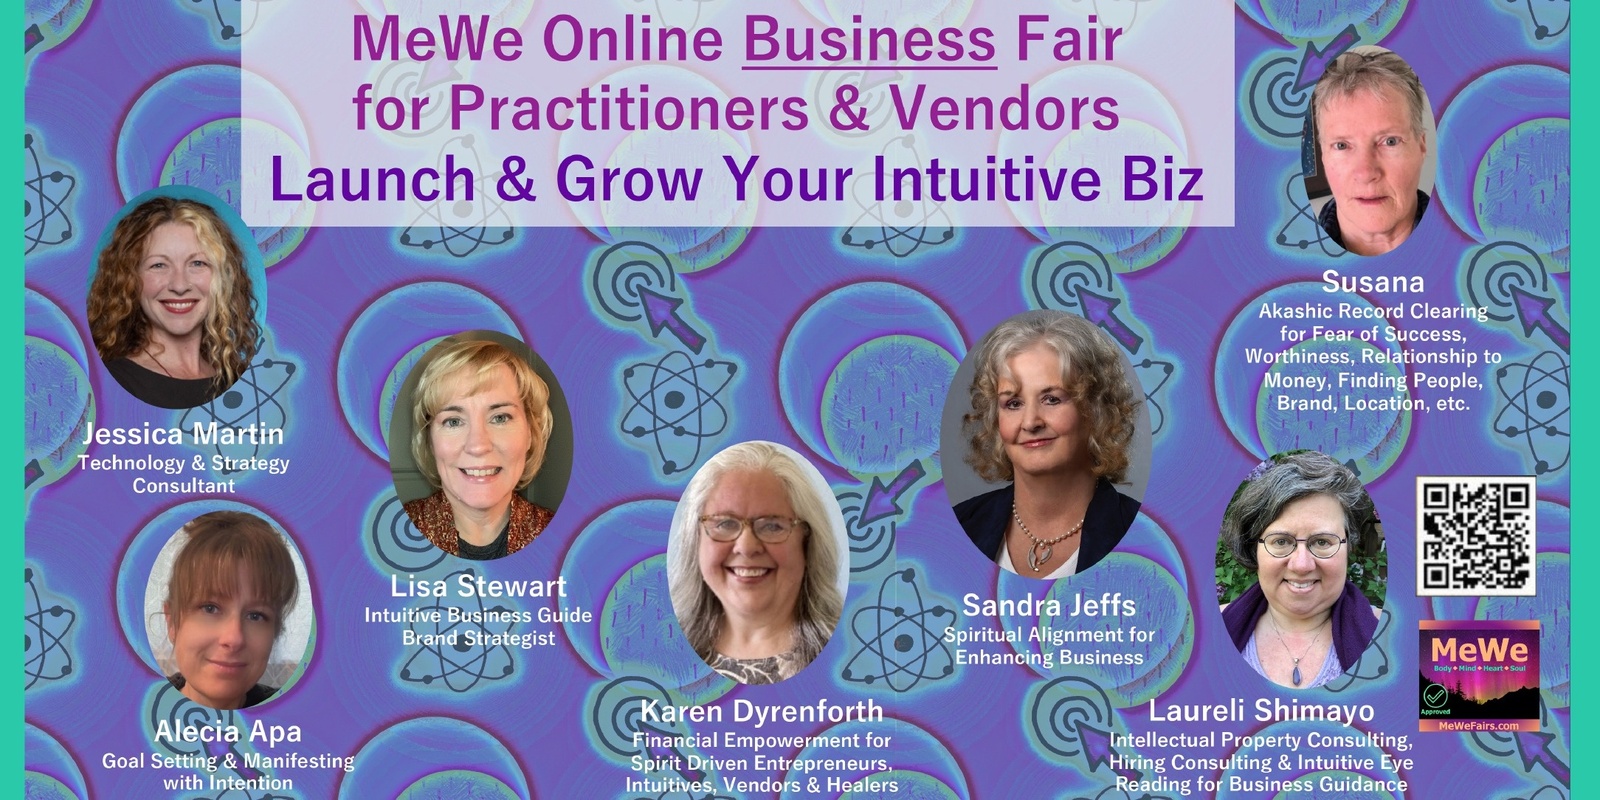 Banner image for Free Online MeWe Biz Fair for Starting & Growing Intuitive, Metaphysical & Spiritual Businesses with 12 Practitioners/Consultants